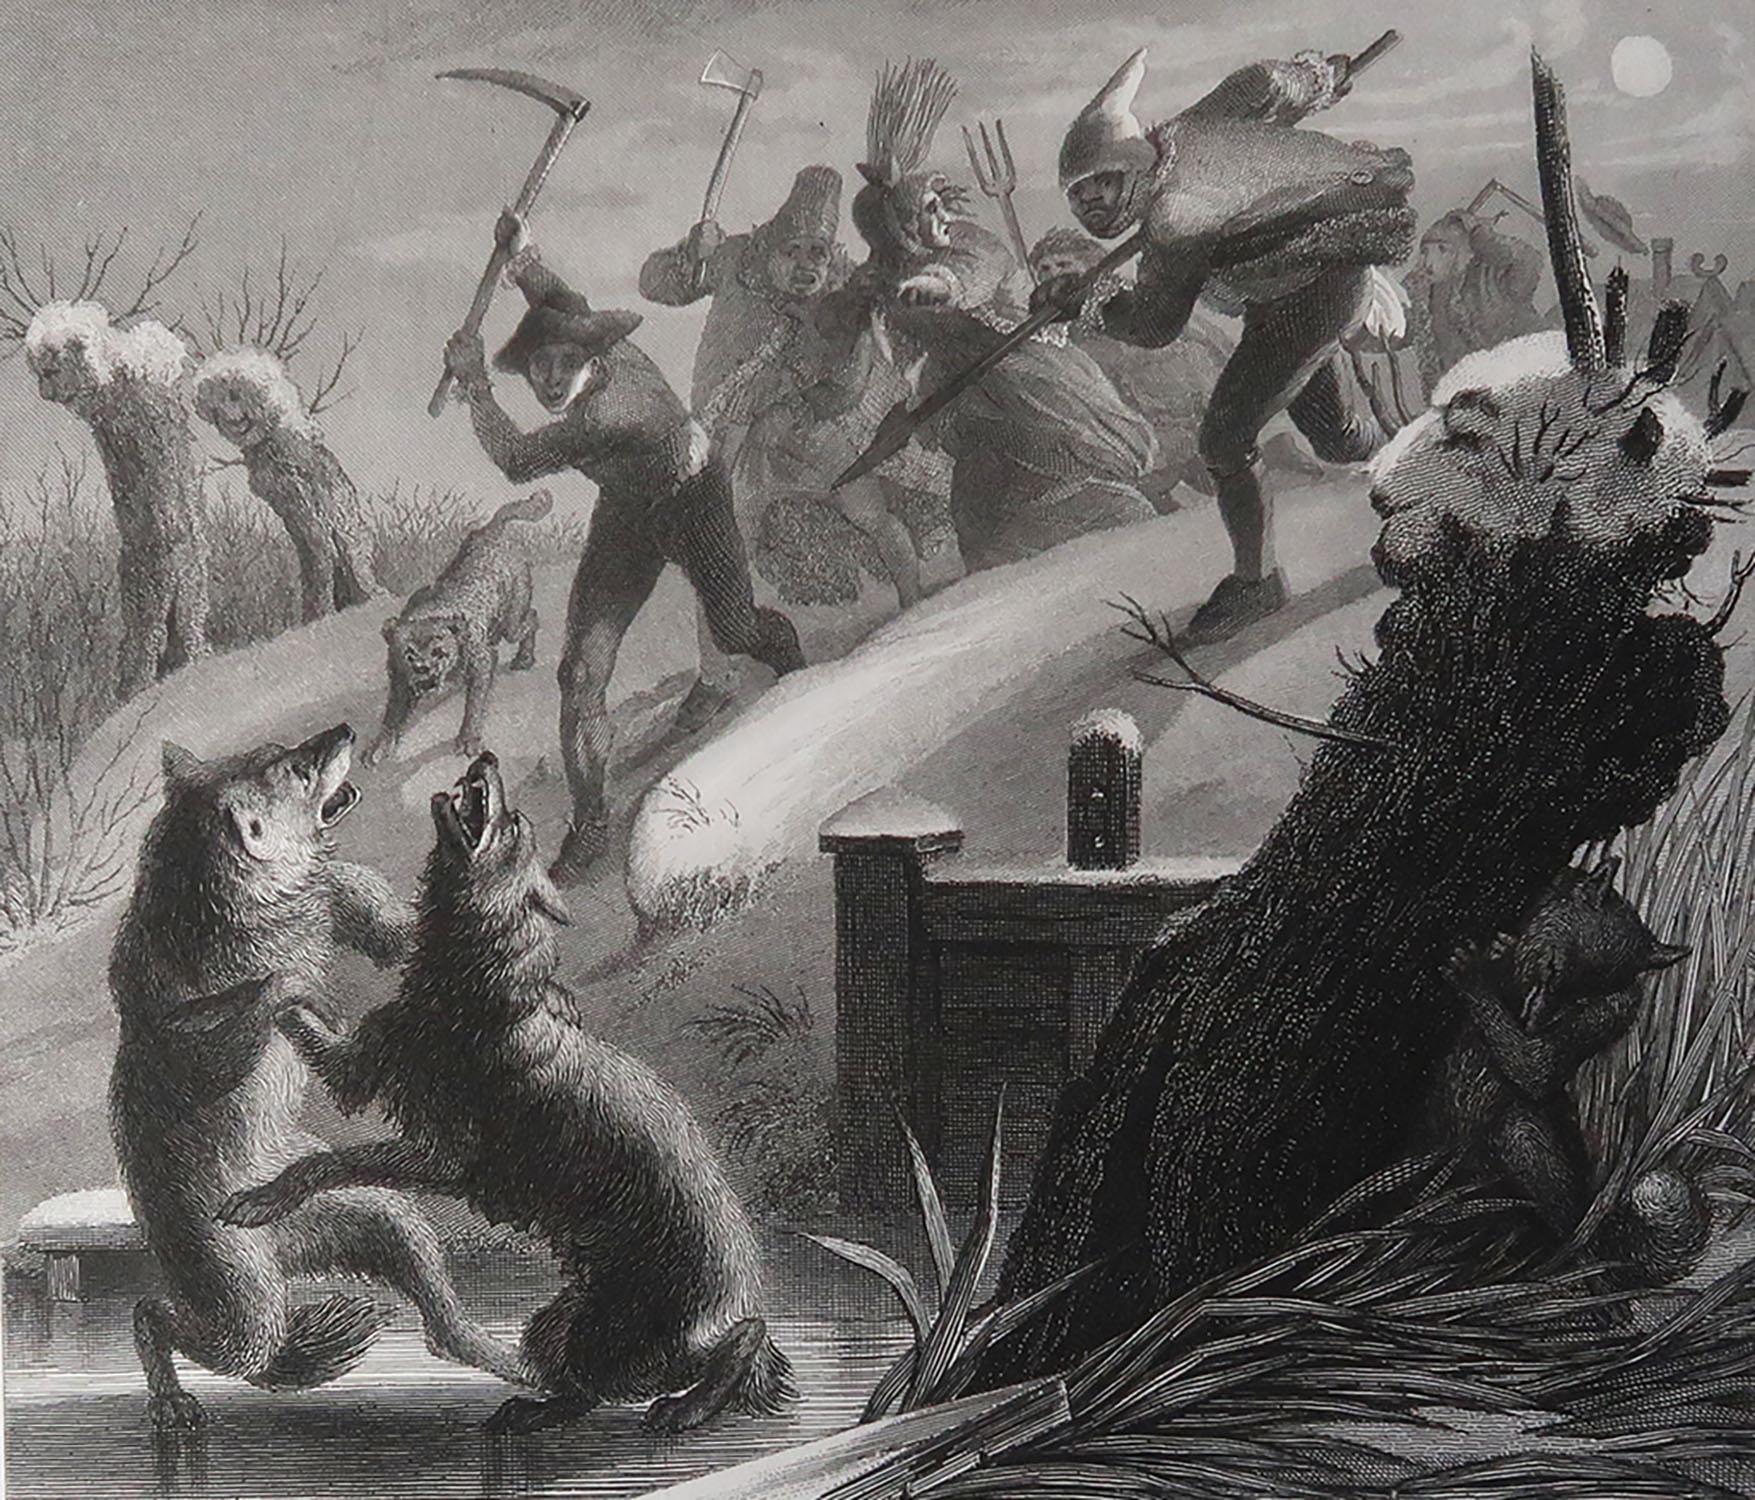 Great image by Heinrich Leutemann

From the Reynard The Fox series

Fine steel engraving

Published by A.H. Payne C.1850

Unframed.

